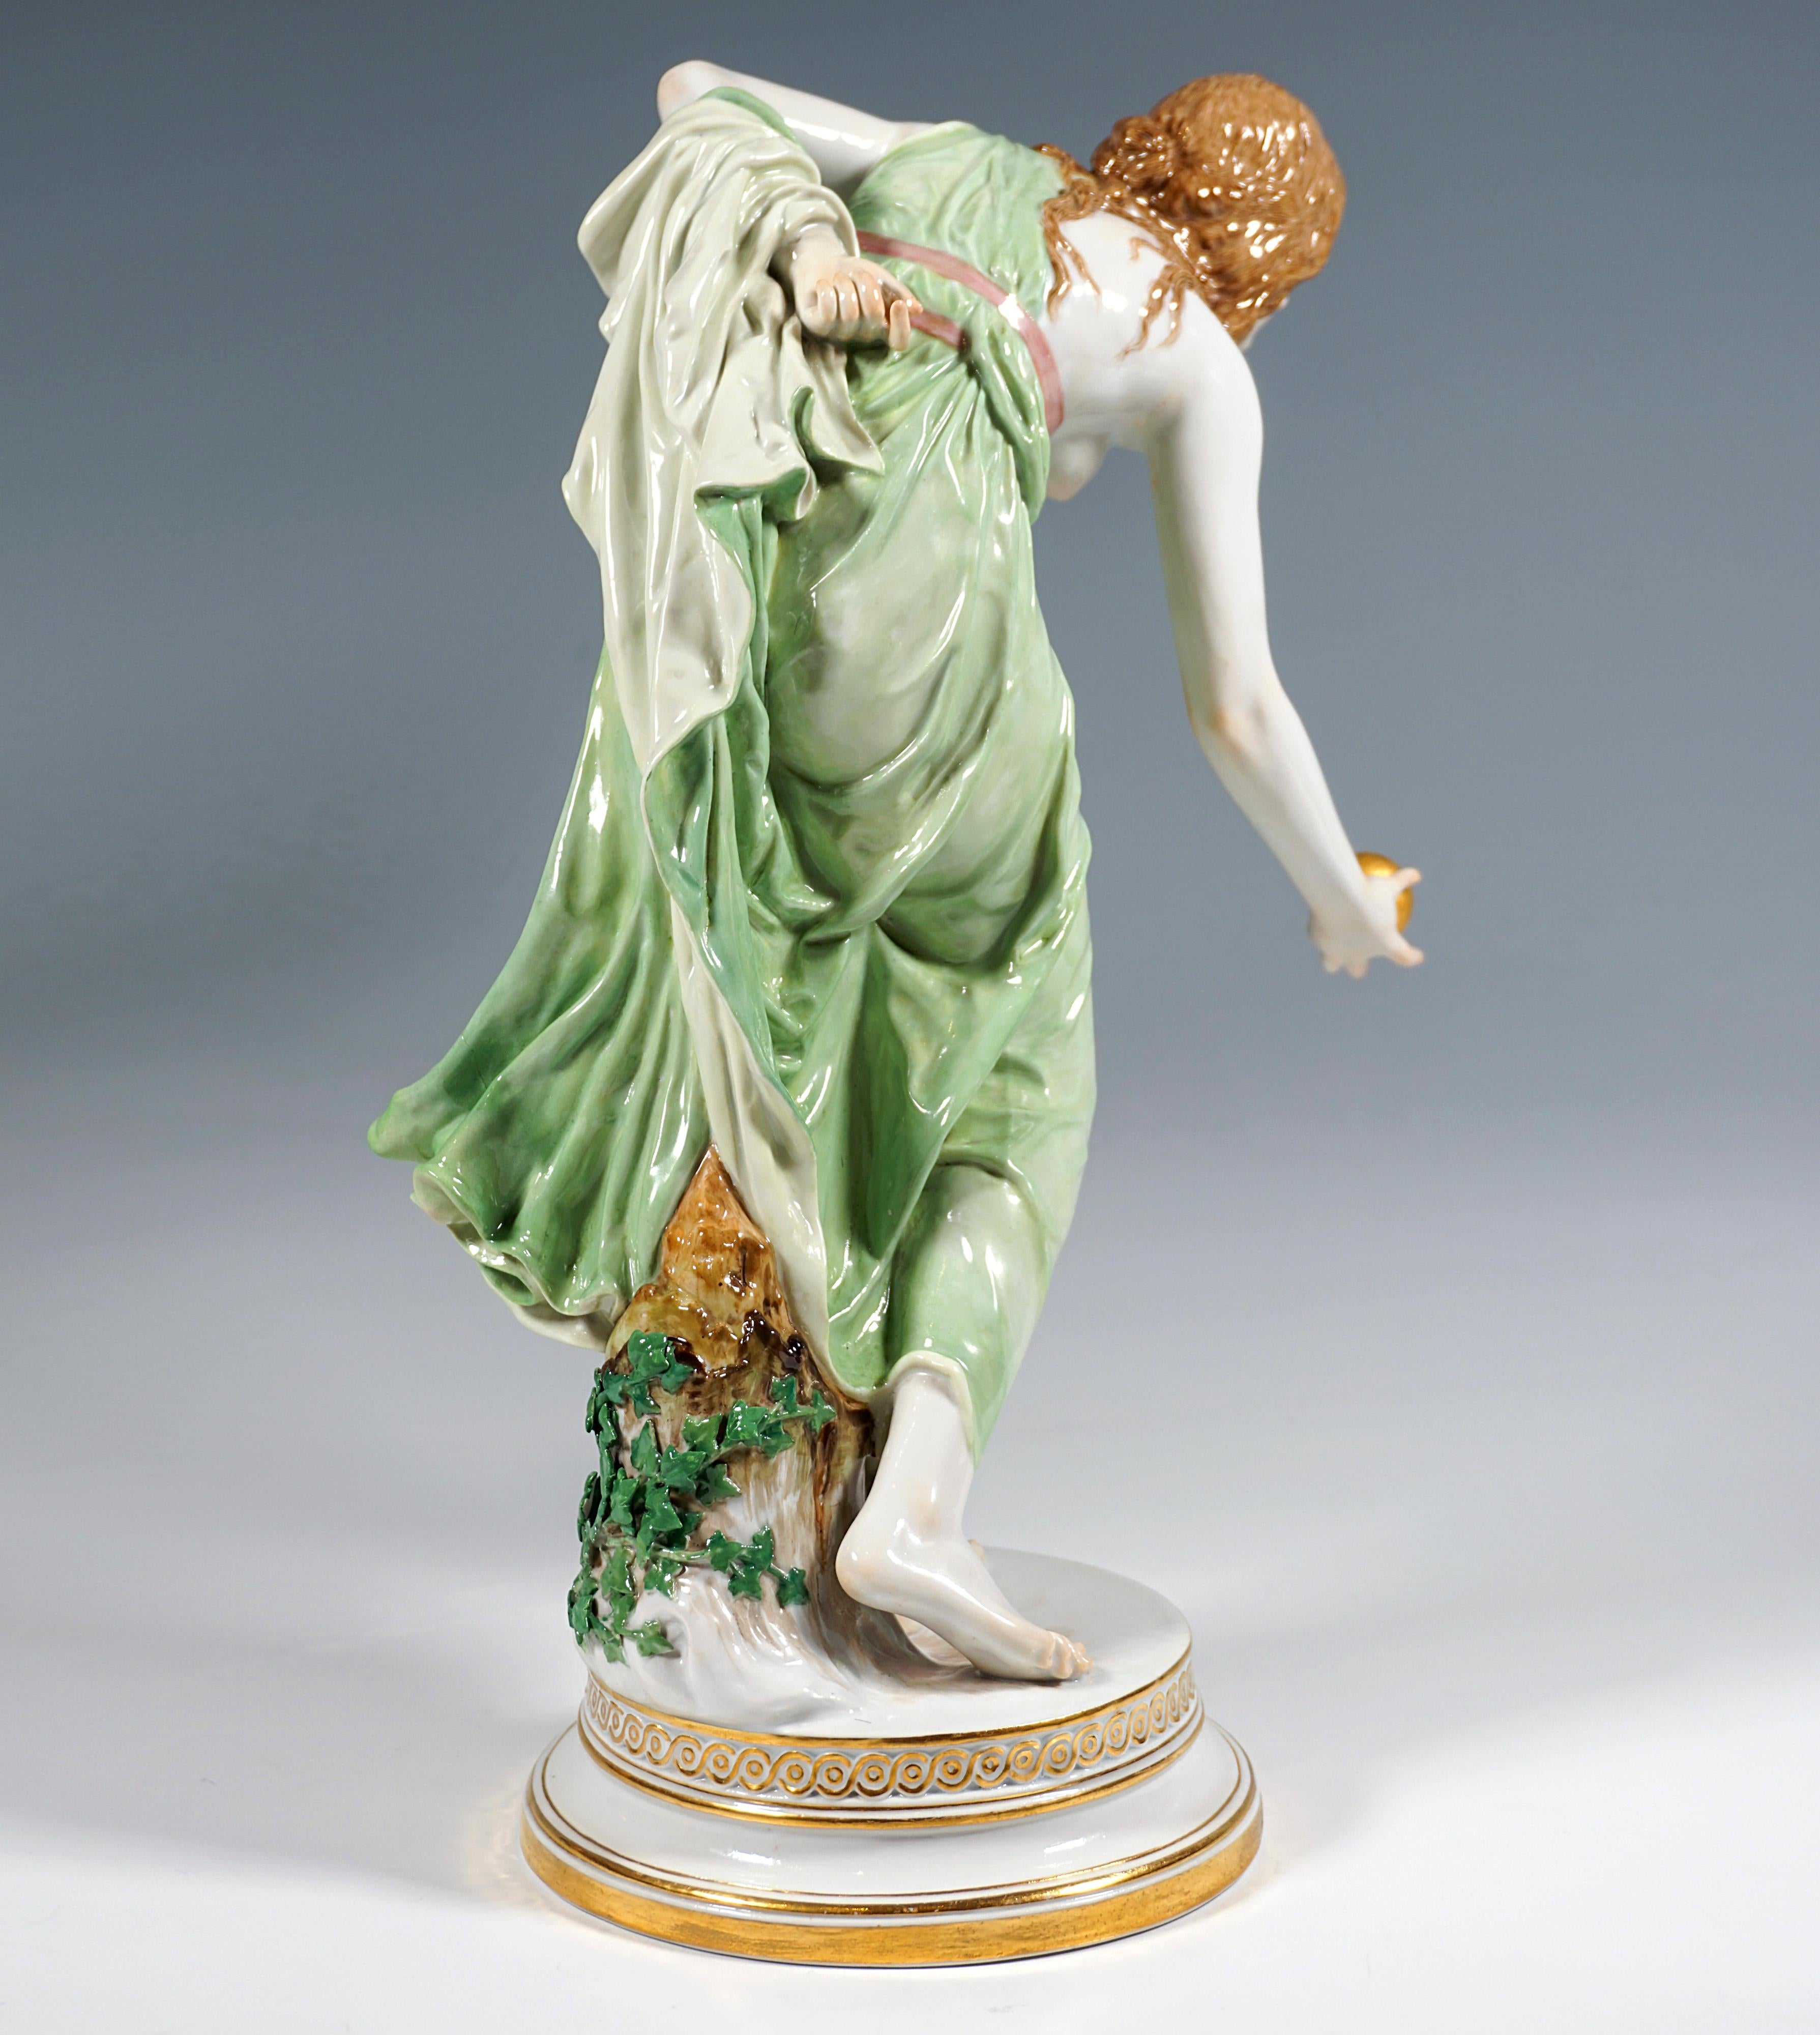 Hand-Crafted Meissen Art Nouveau Figurine, Large Young Lady Ball Player, Walter Schott, 1910